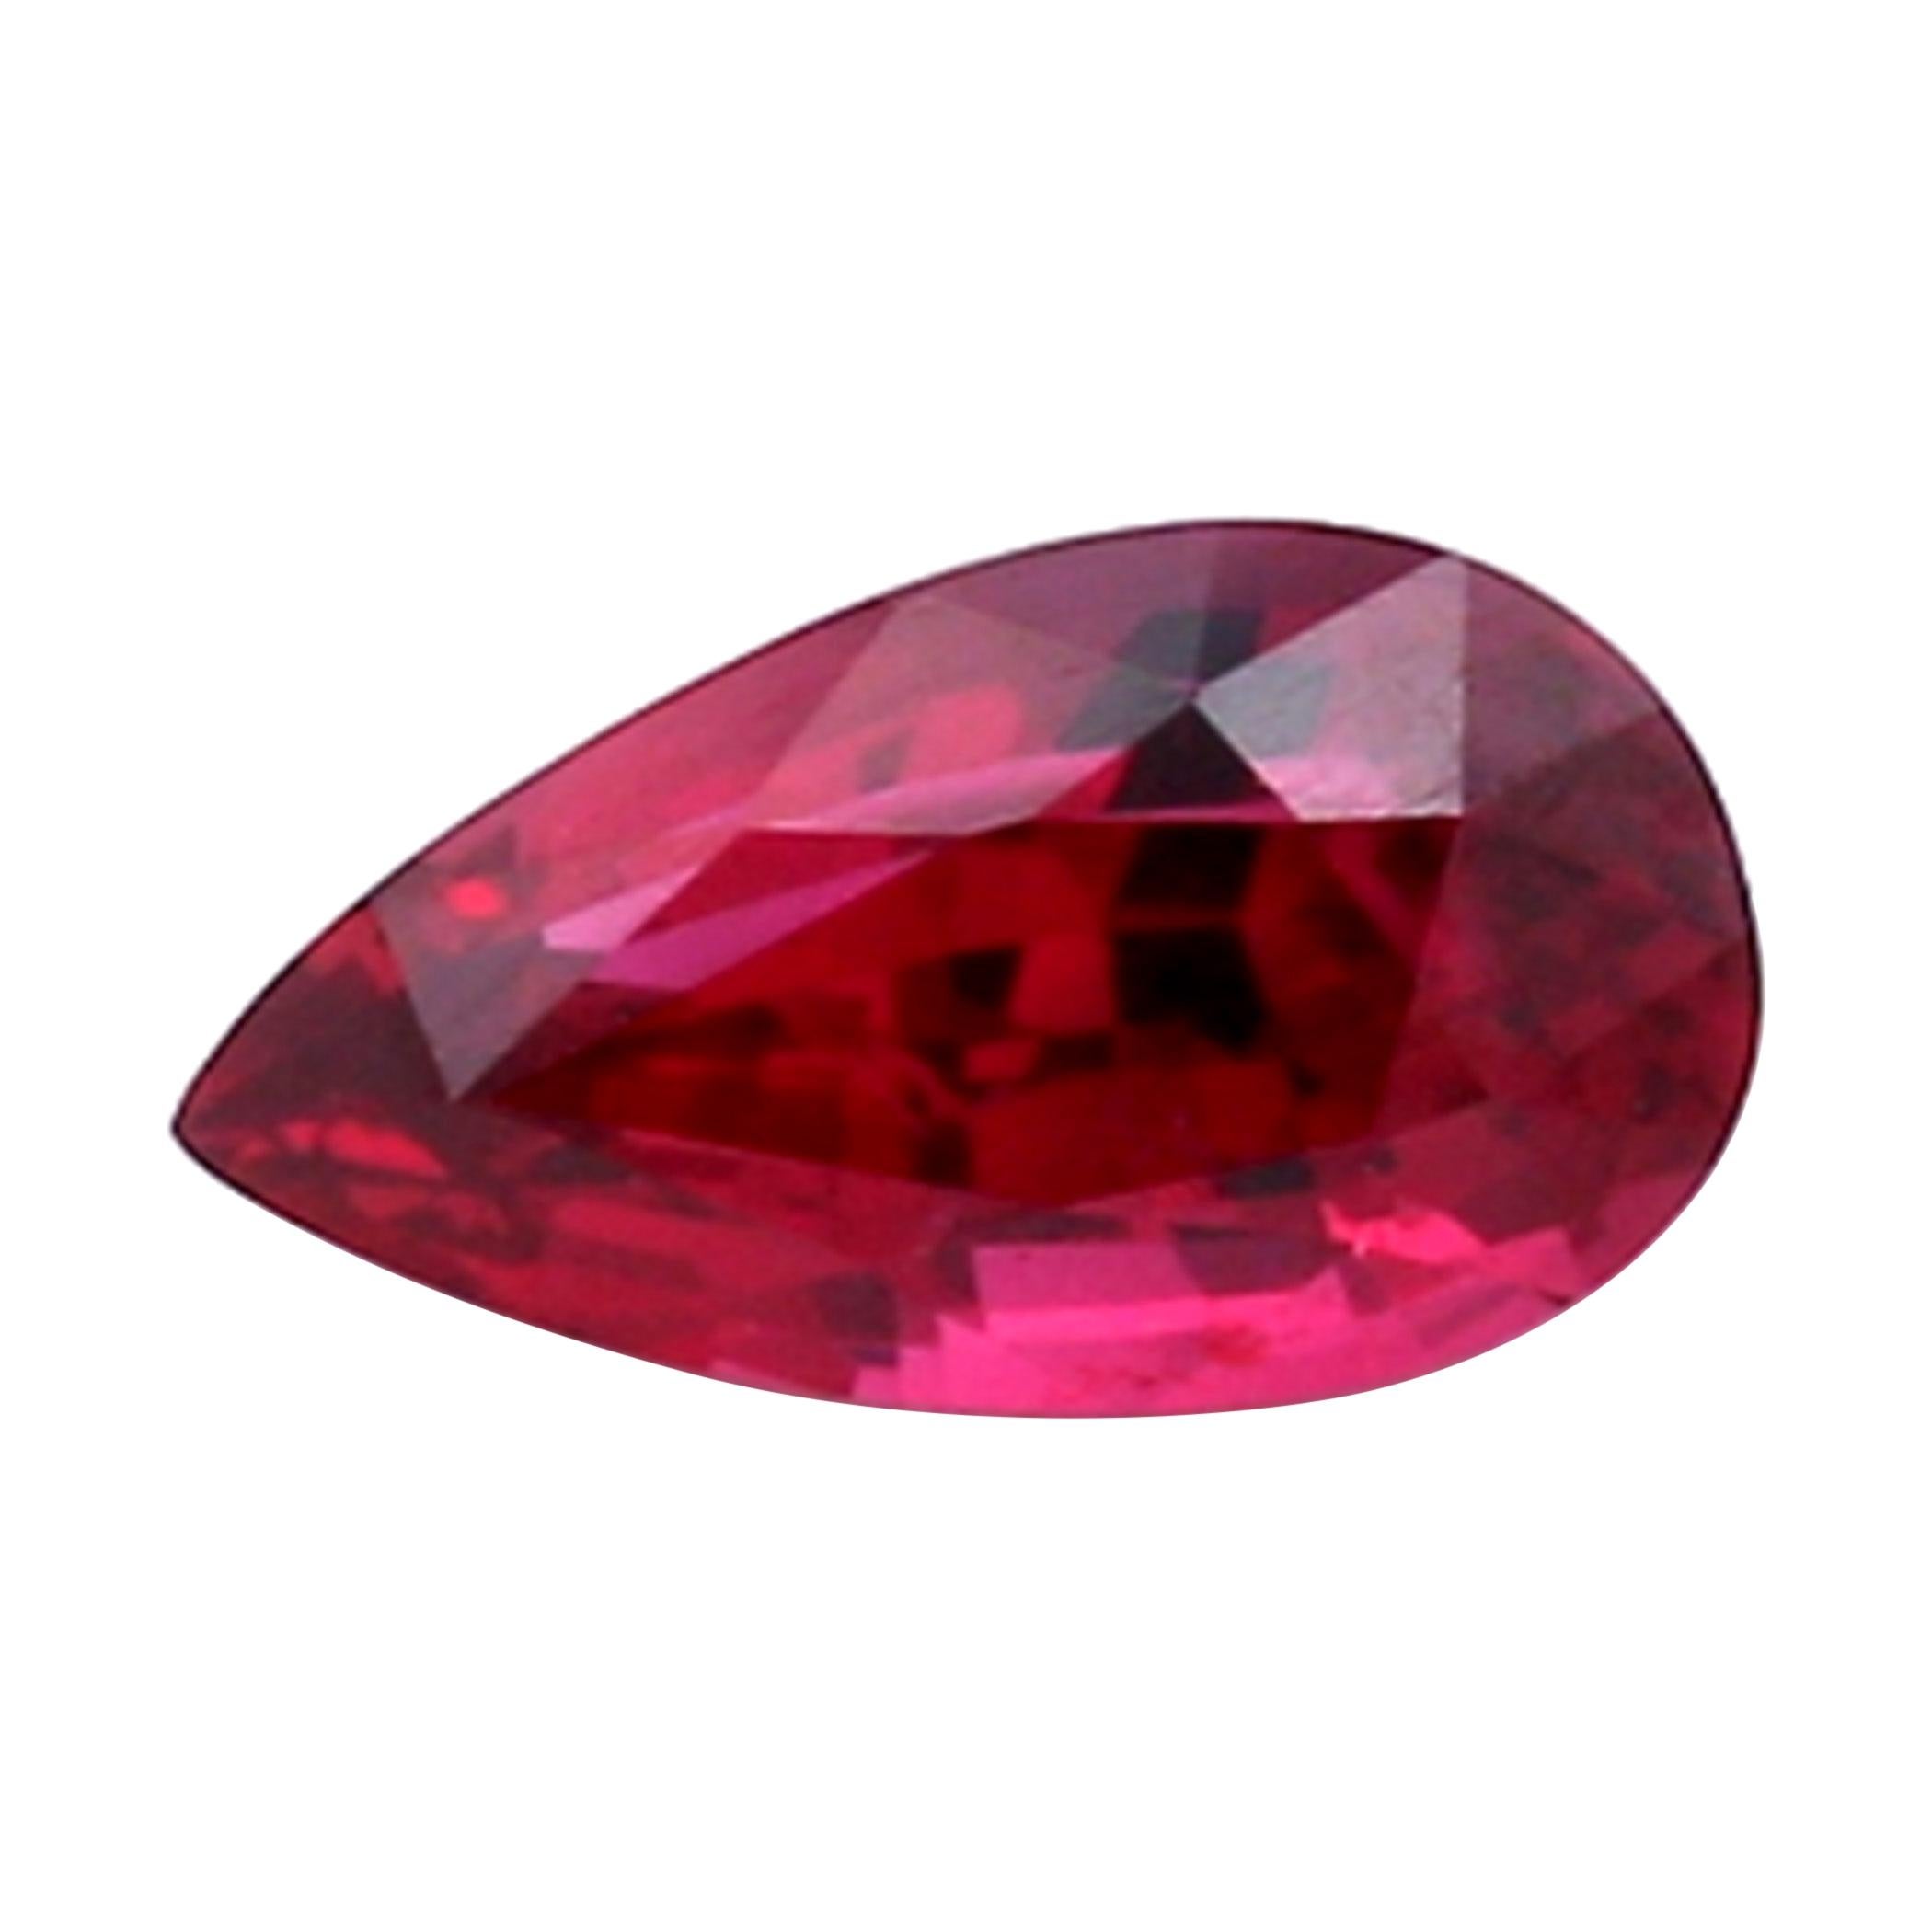 1.01 Carat Natural Pear-Shaped Ruby For Sale